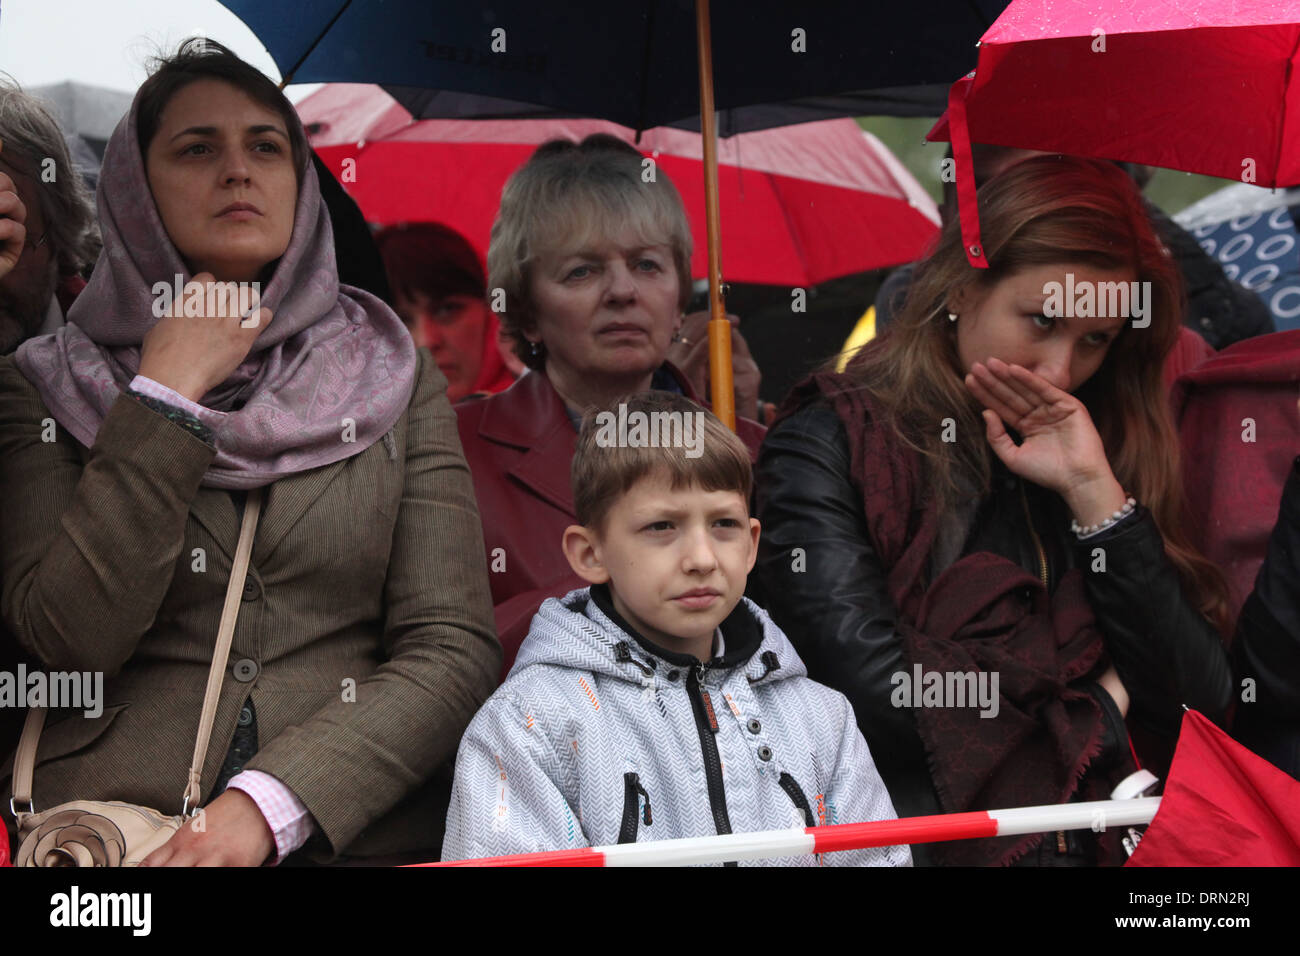 Orthodox believers wearing raincoats attend an orthodox service in honour of Saints Cyril and Methodius in Mikulcice. Stock Photo